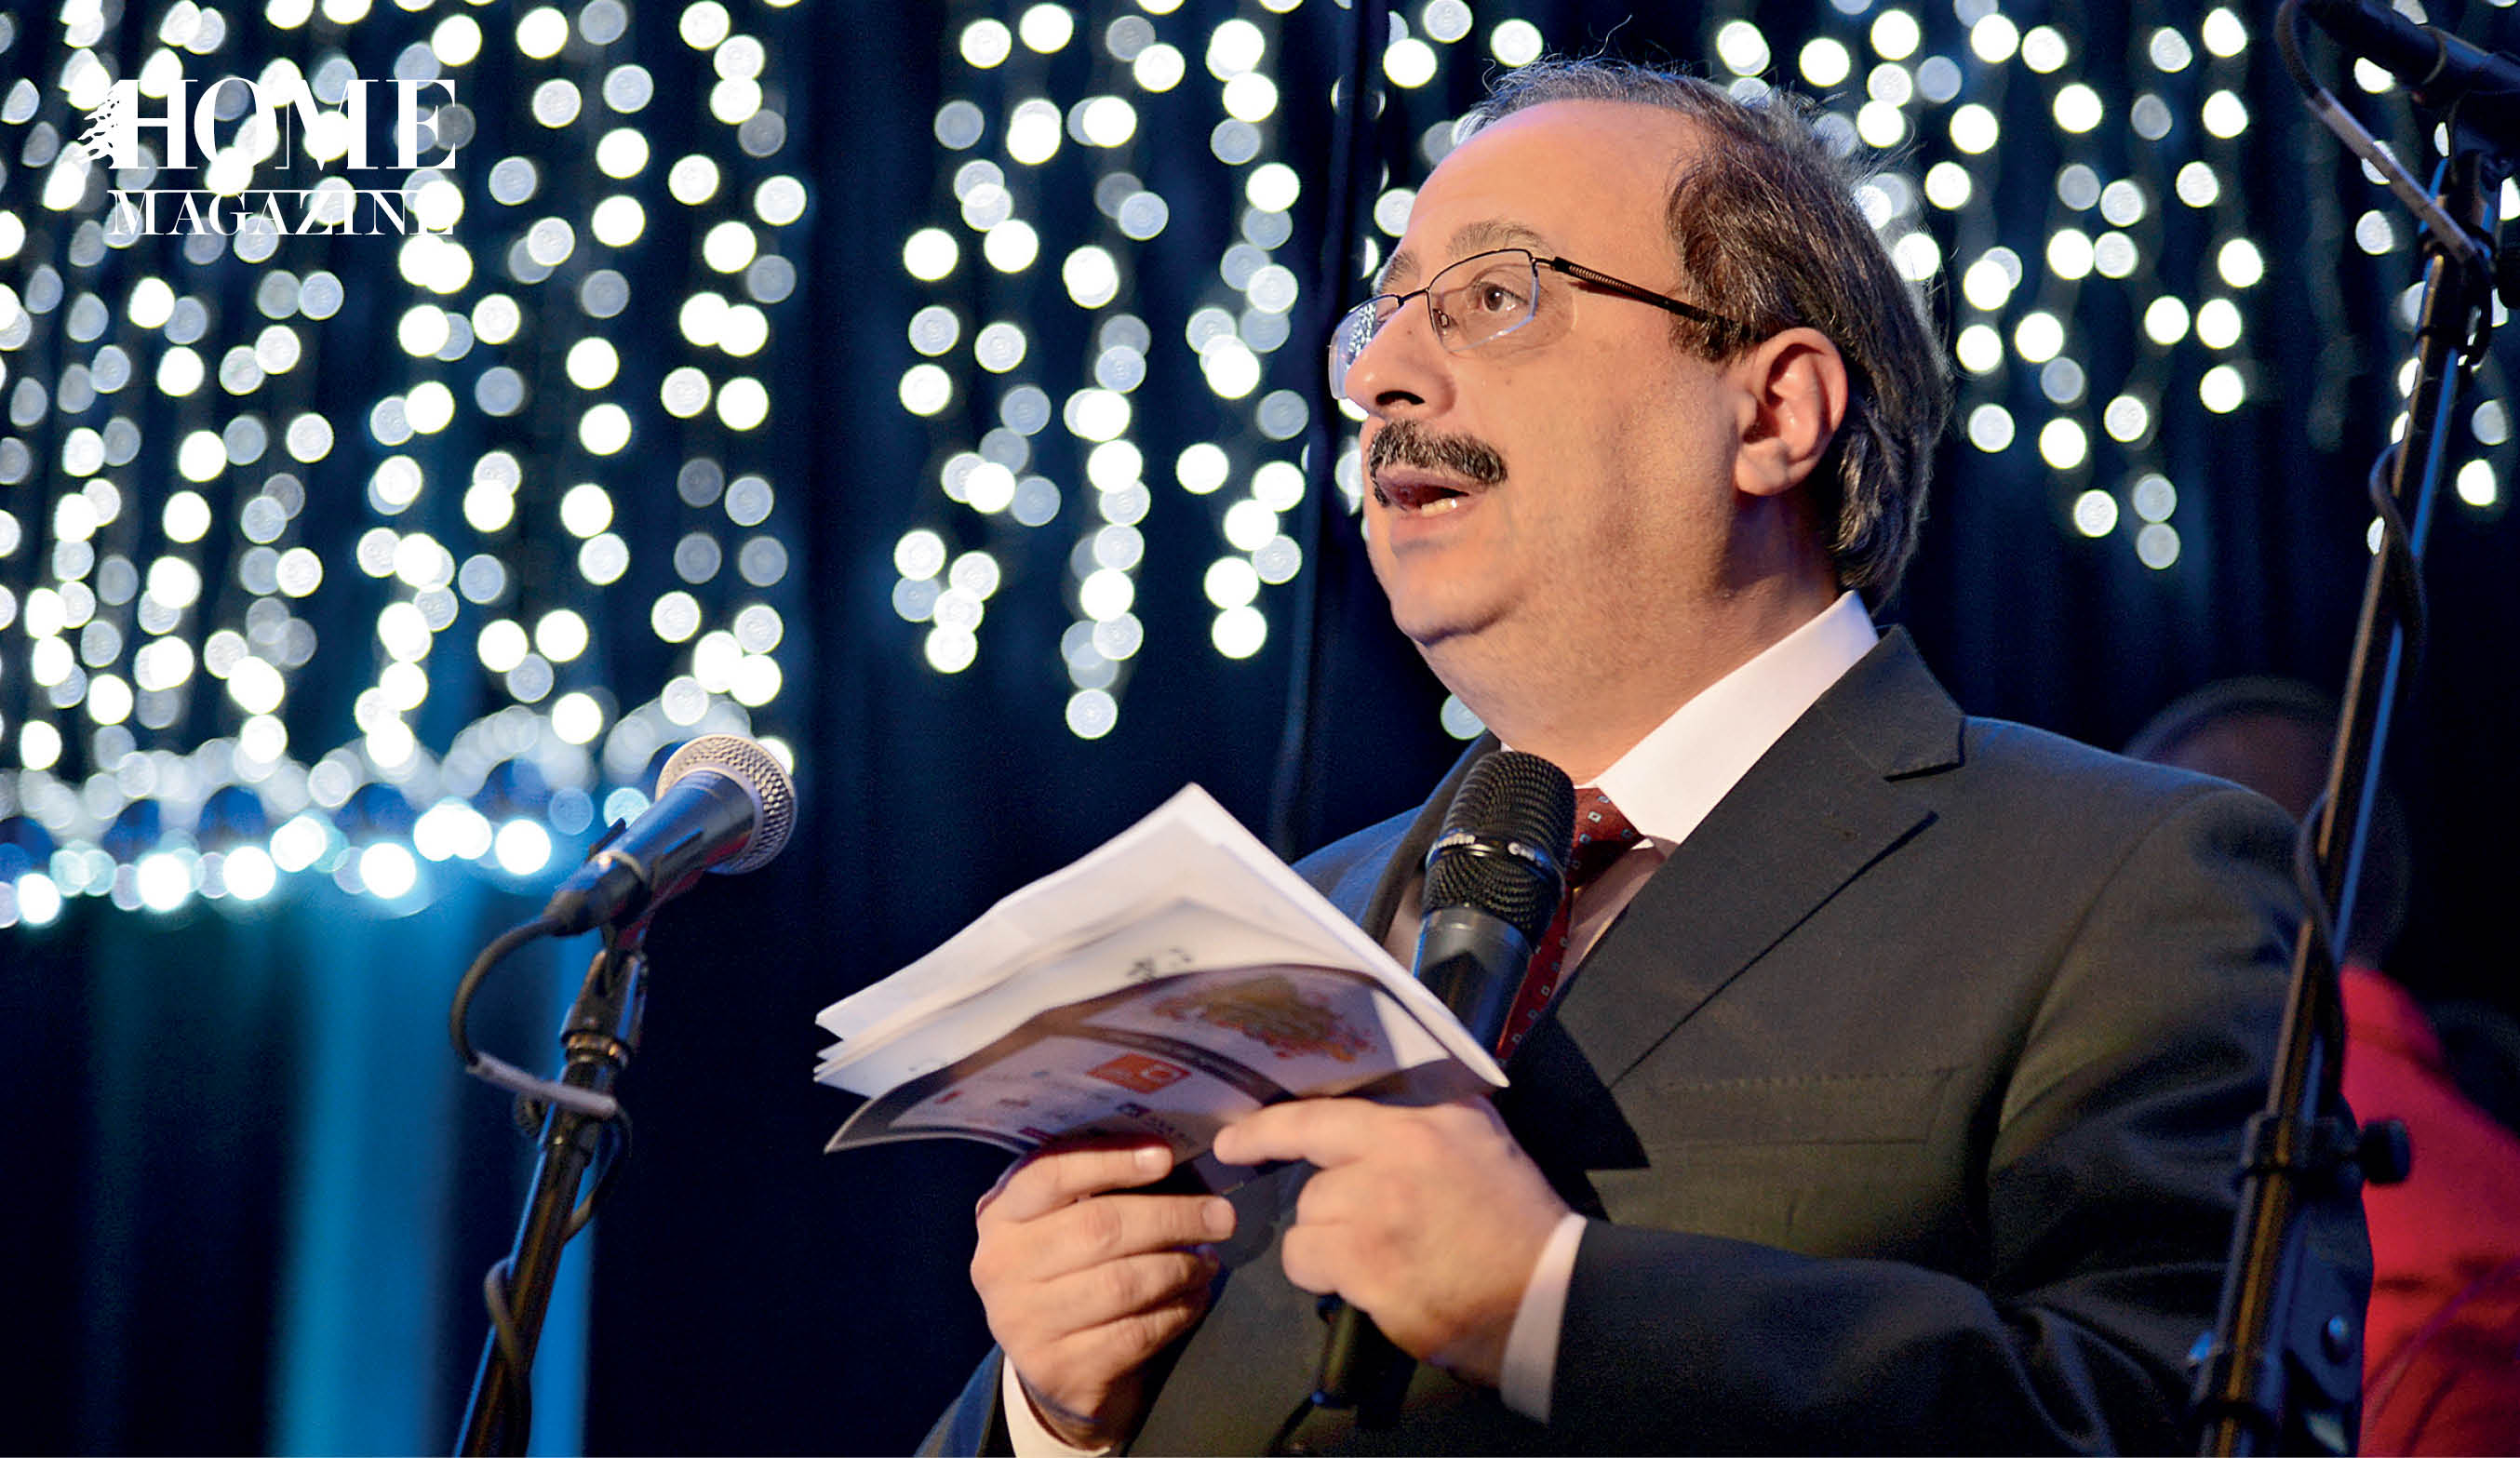 Bald man wearing eyeglasses speaking on a microphone with a notebook in his hands